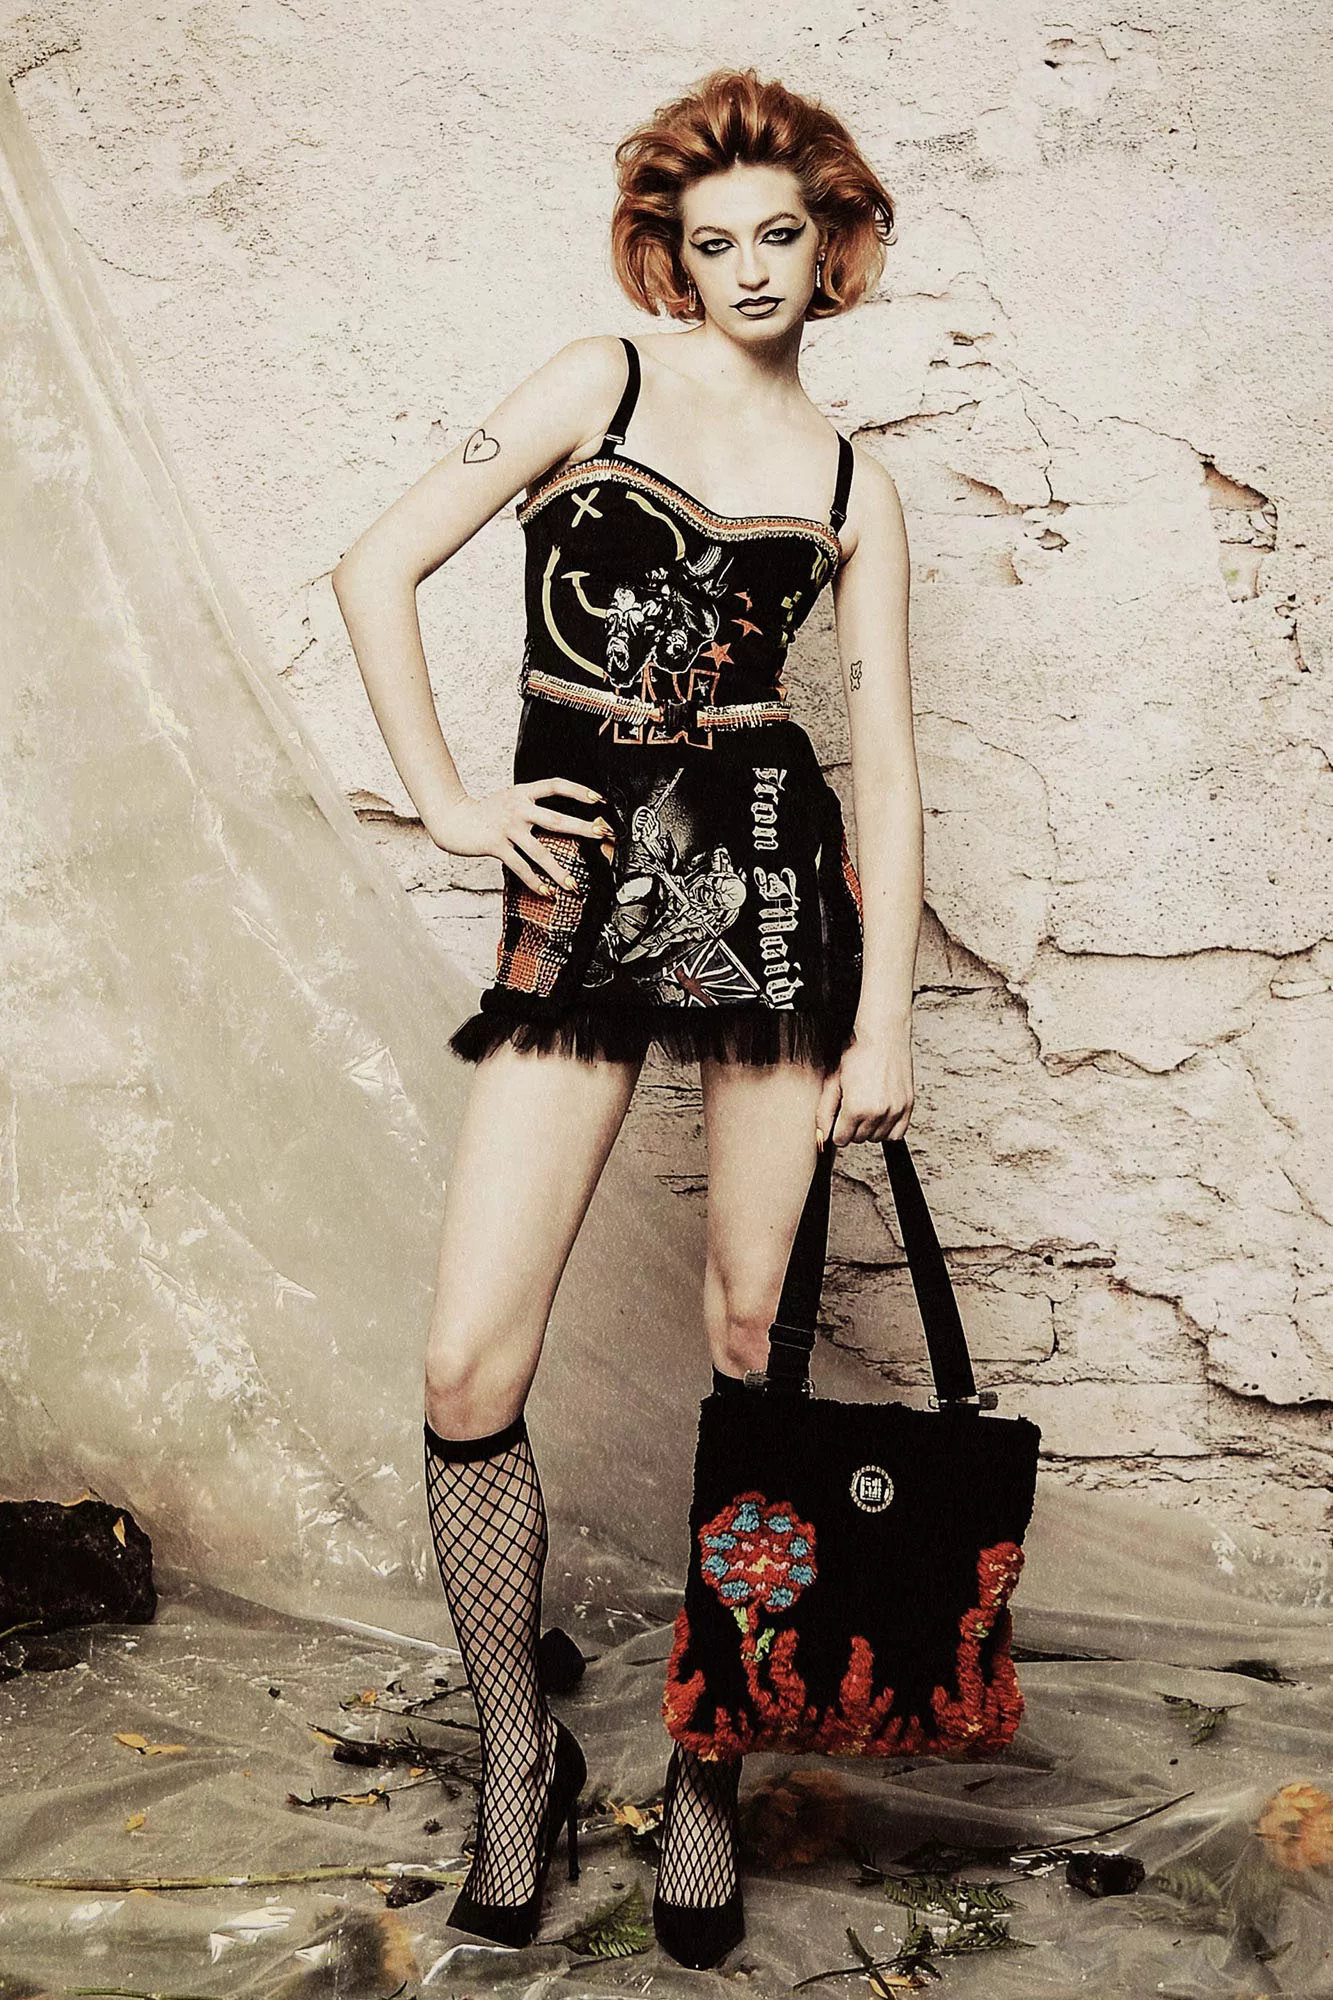 woman in corset and miniskirt made from rock concert t-shirts by tara babylon